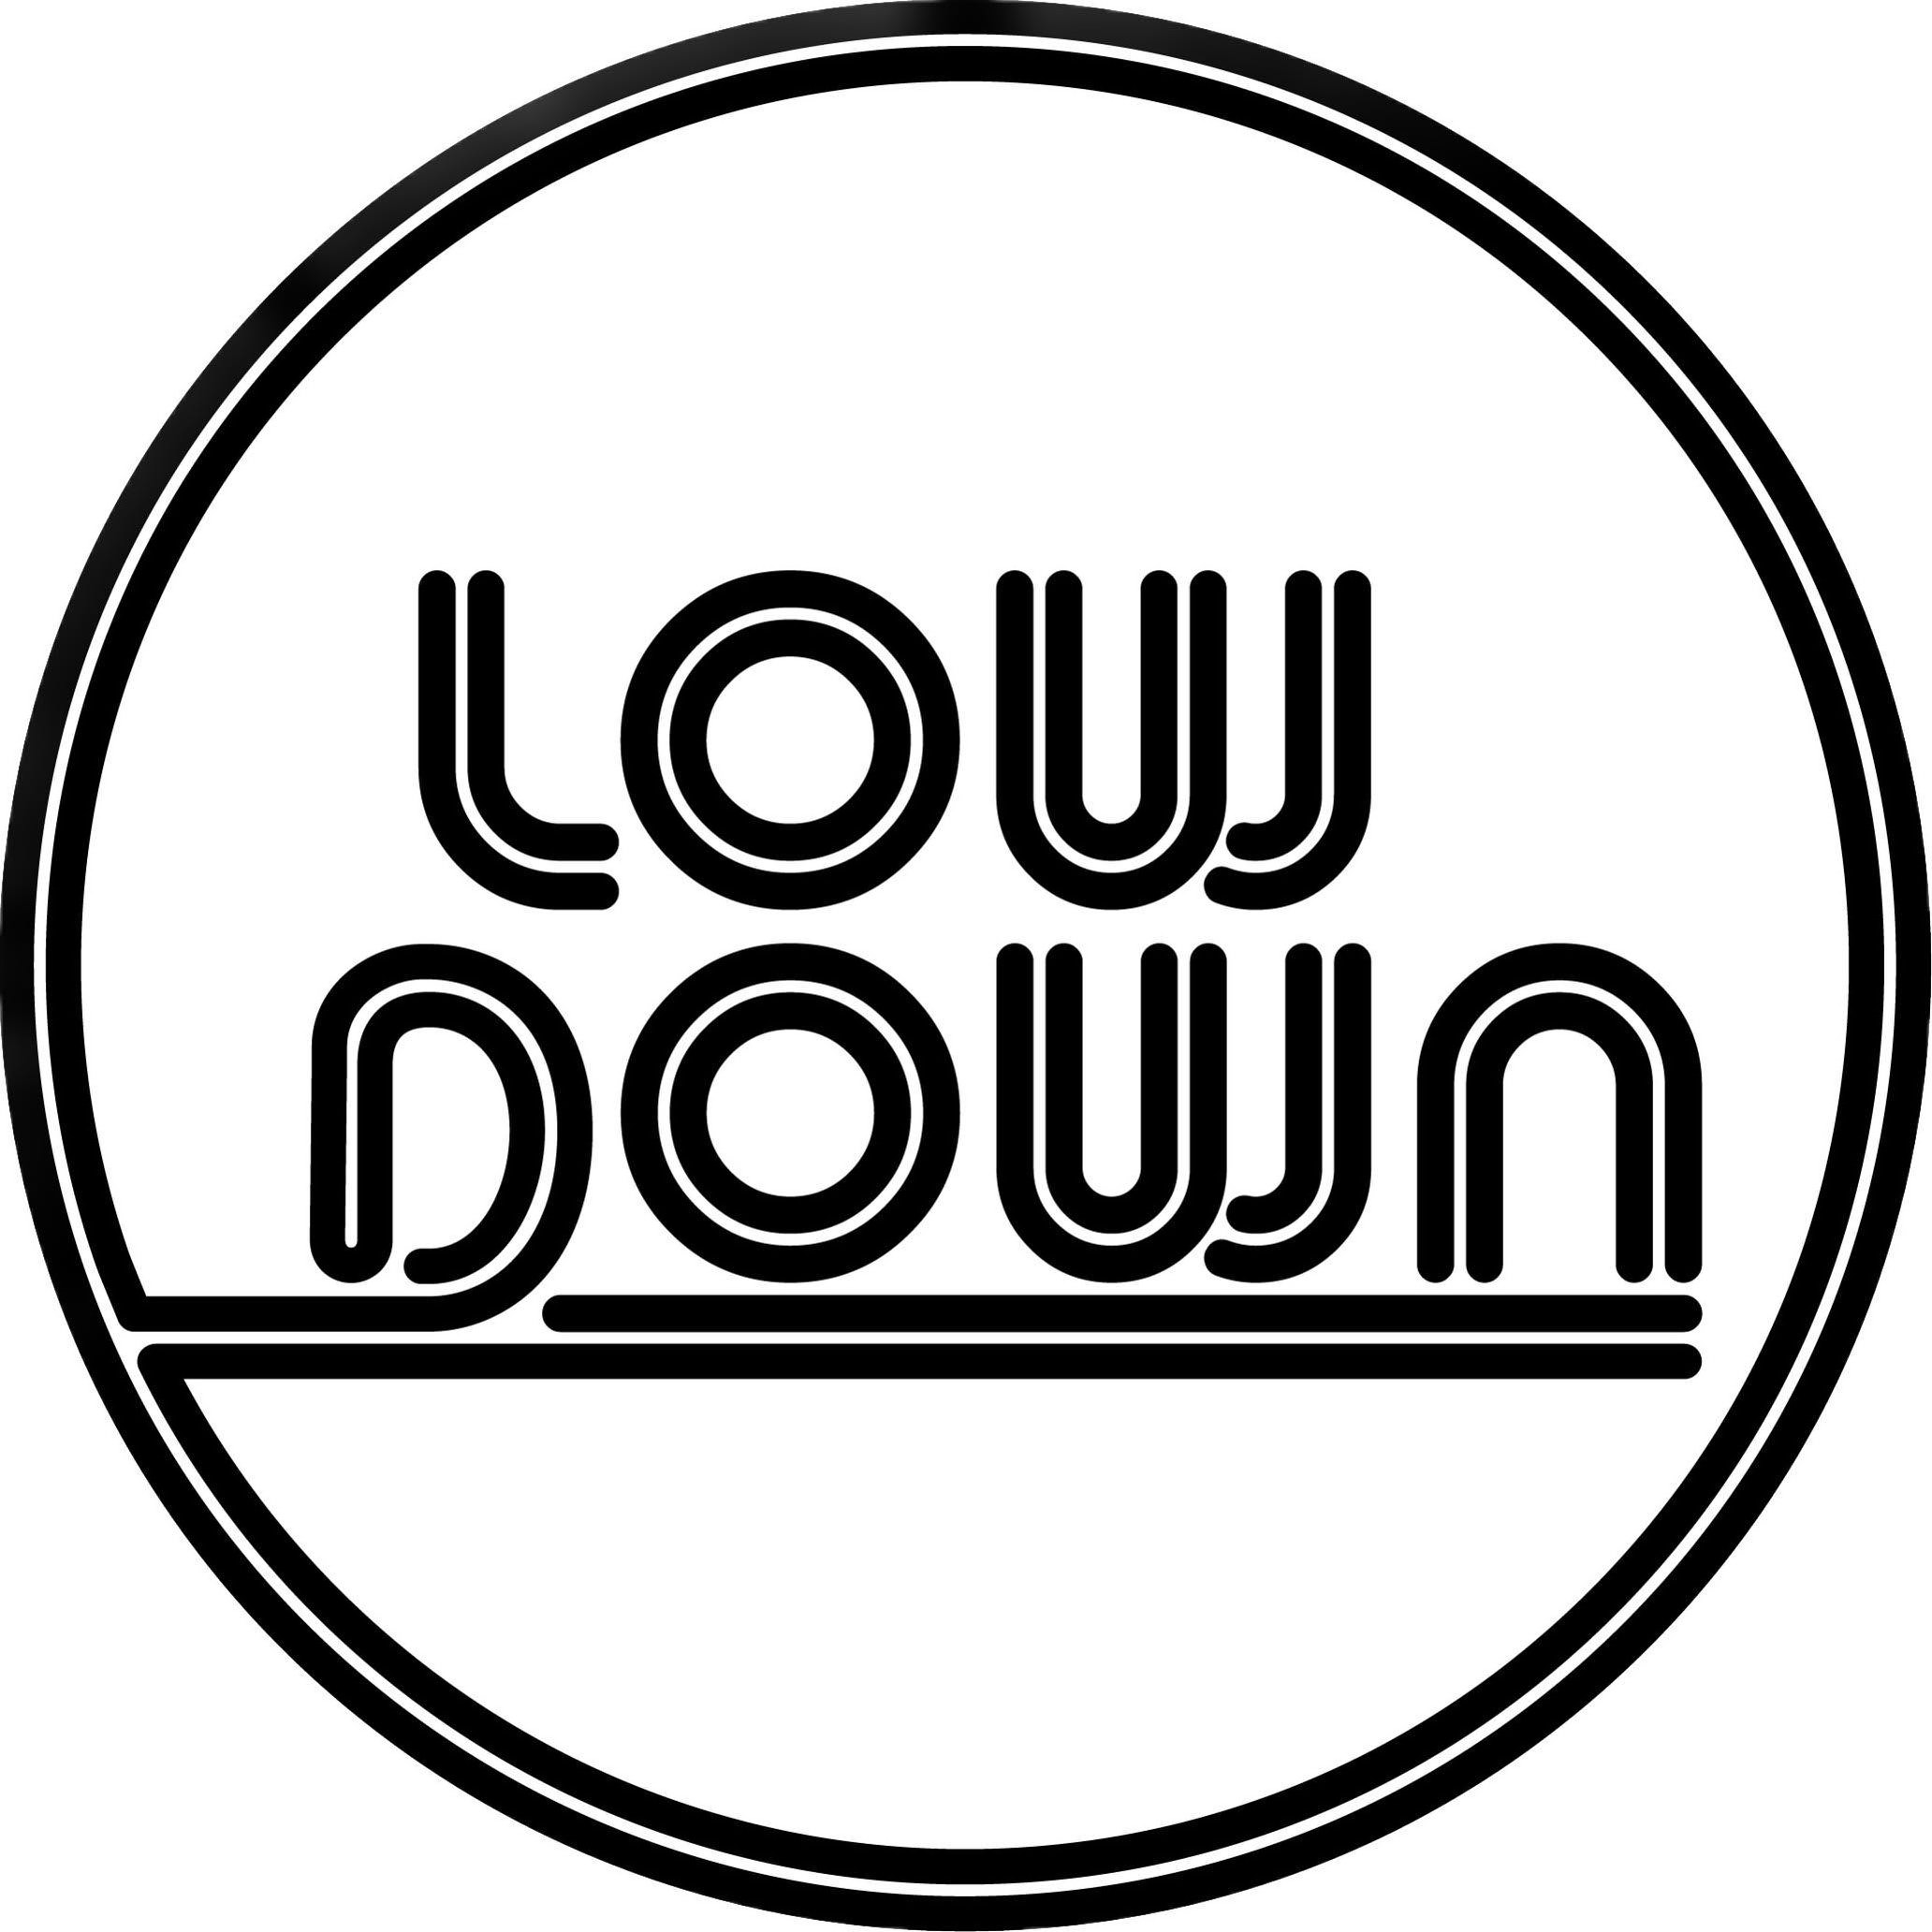 LOW DOWN